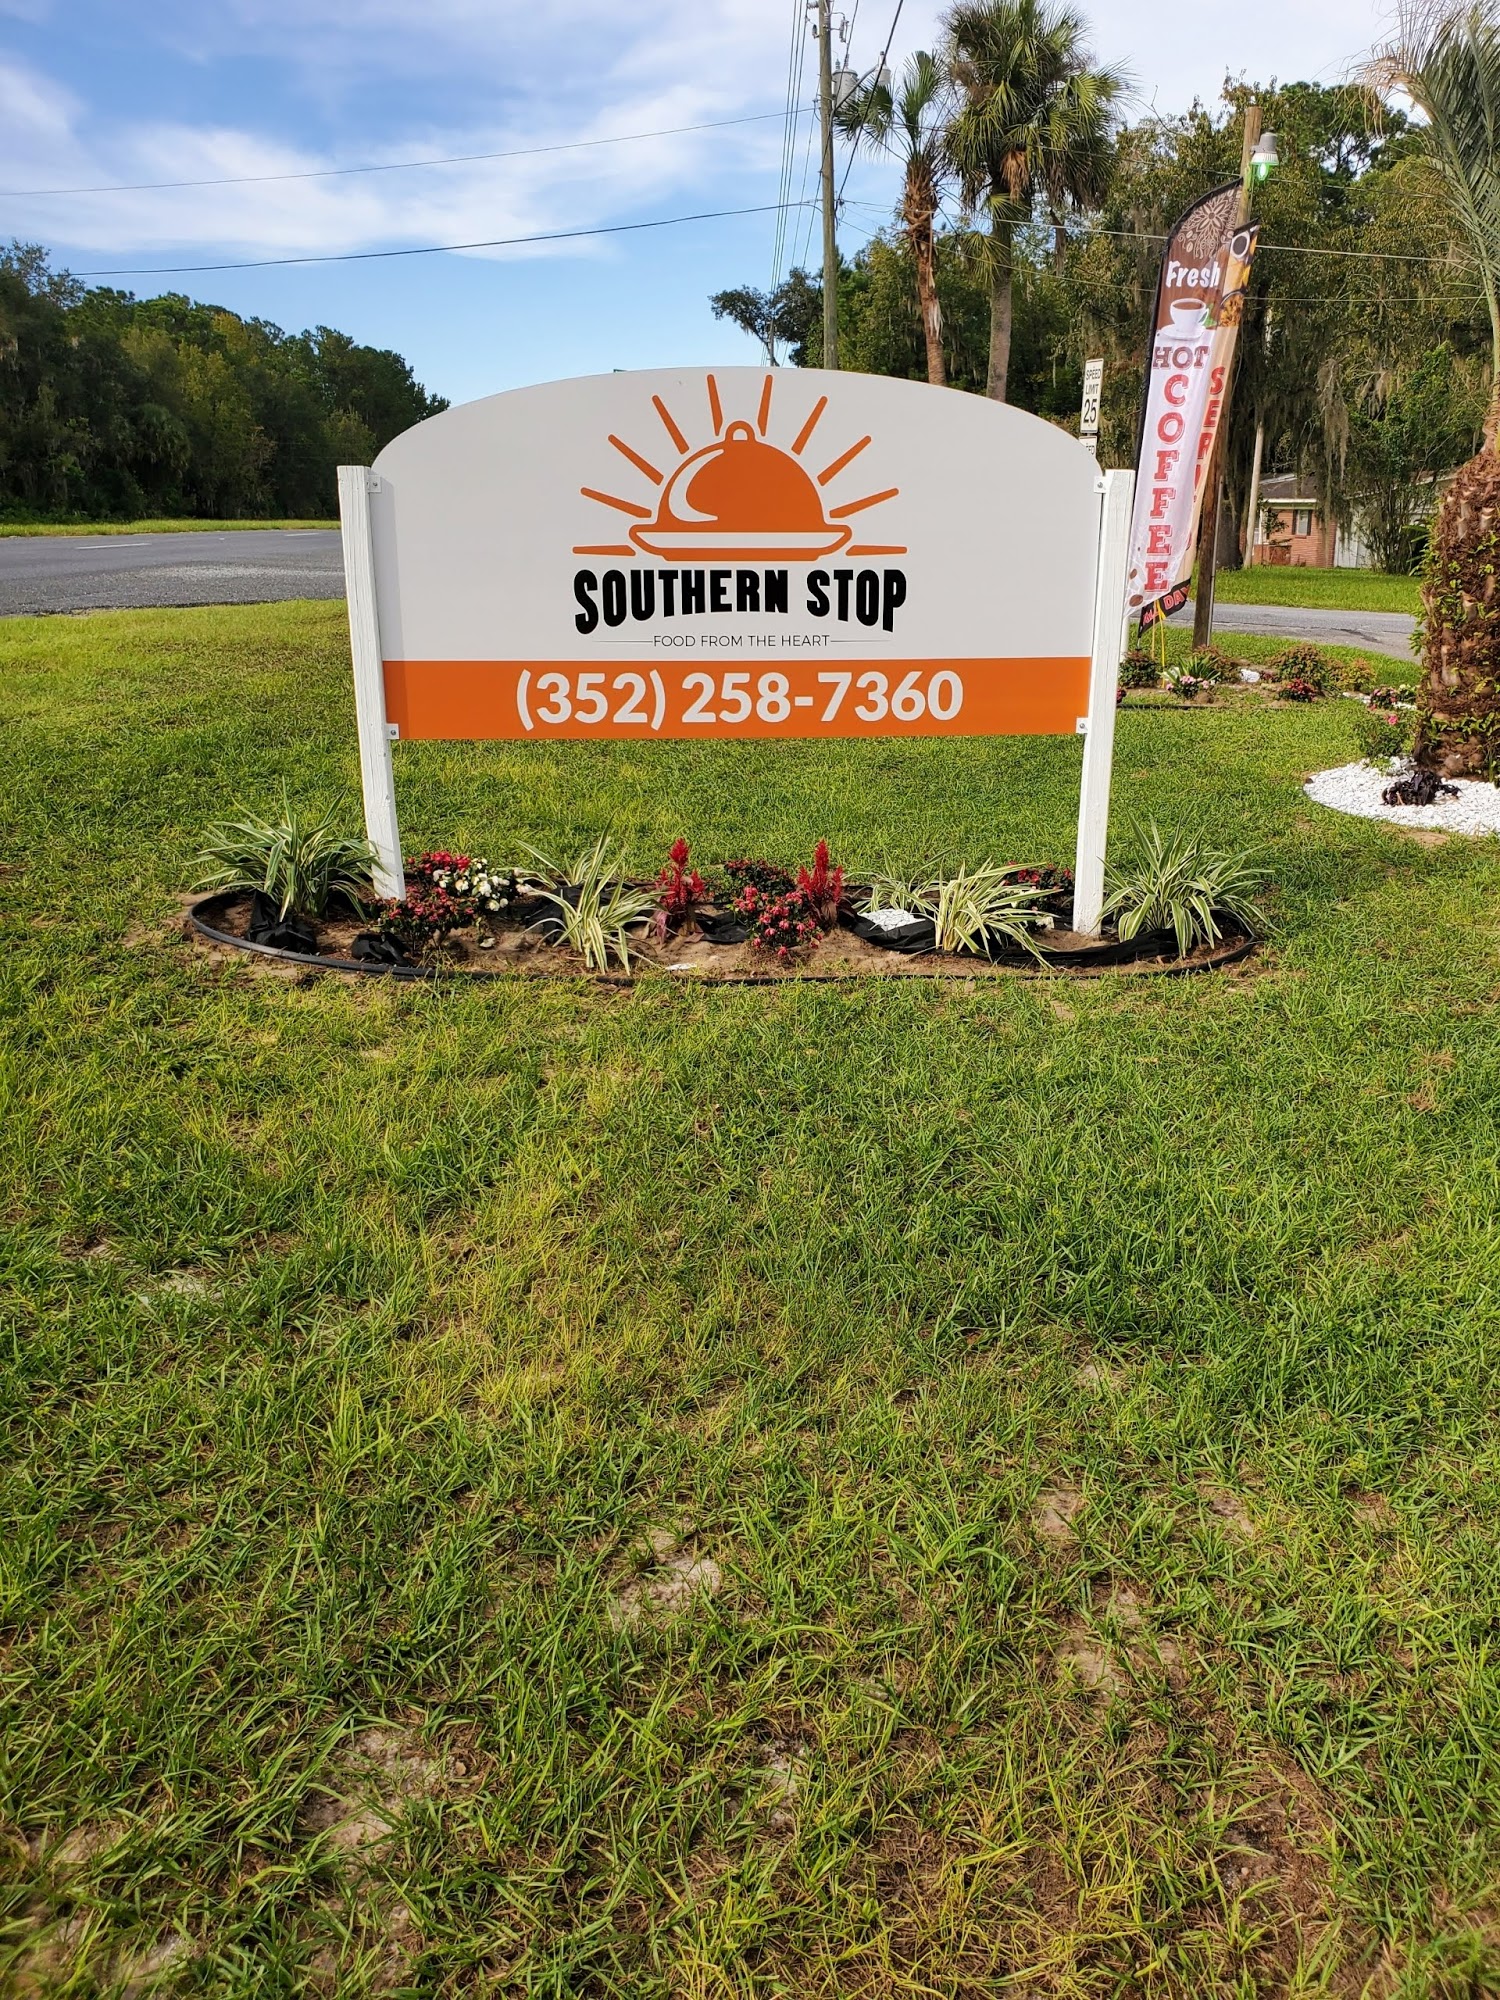 Southern Stop